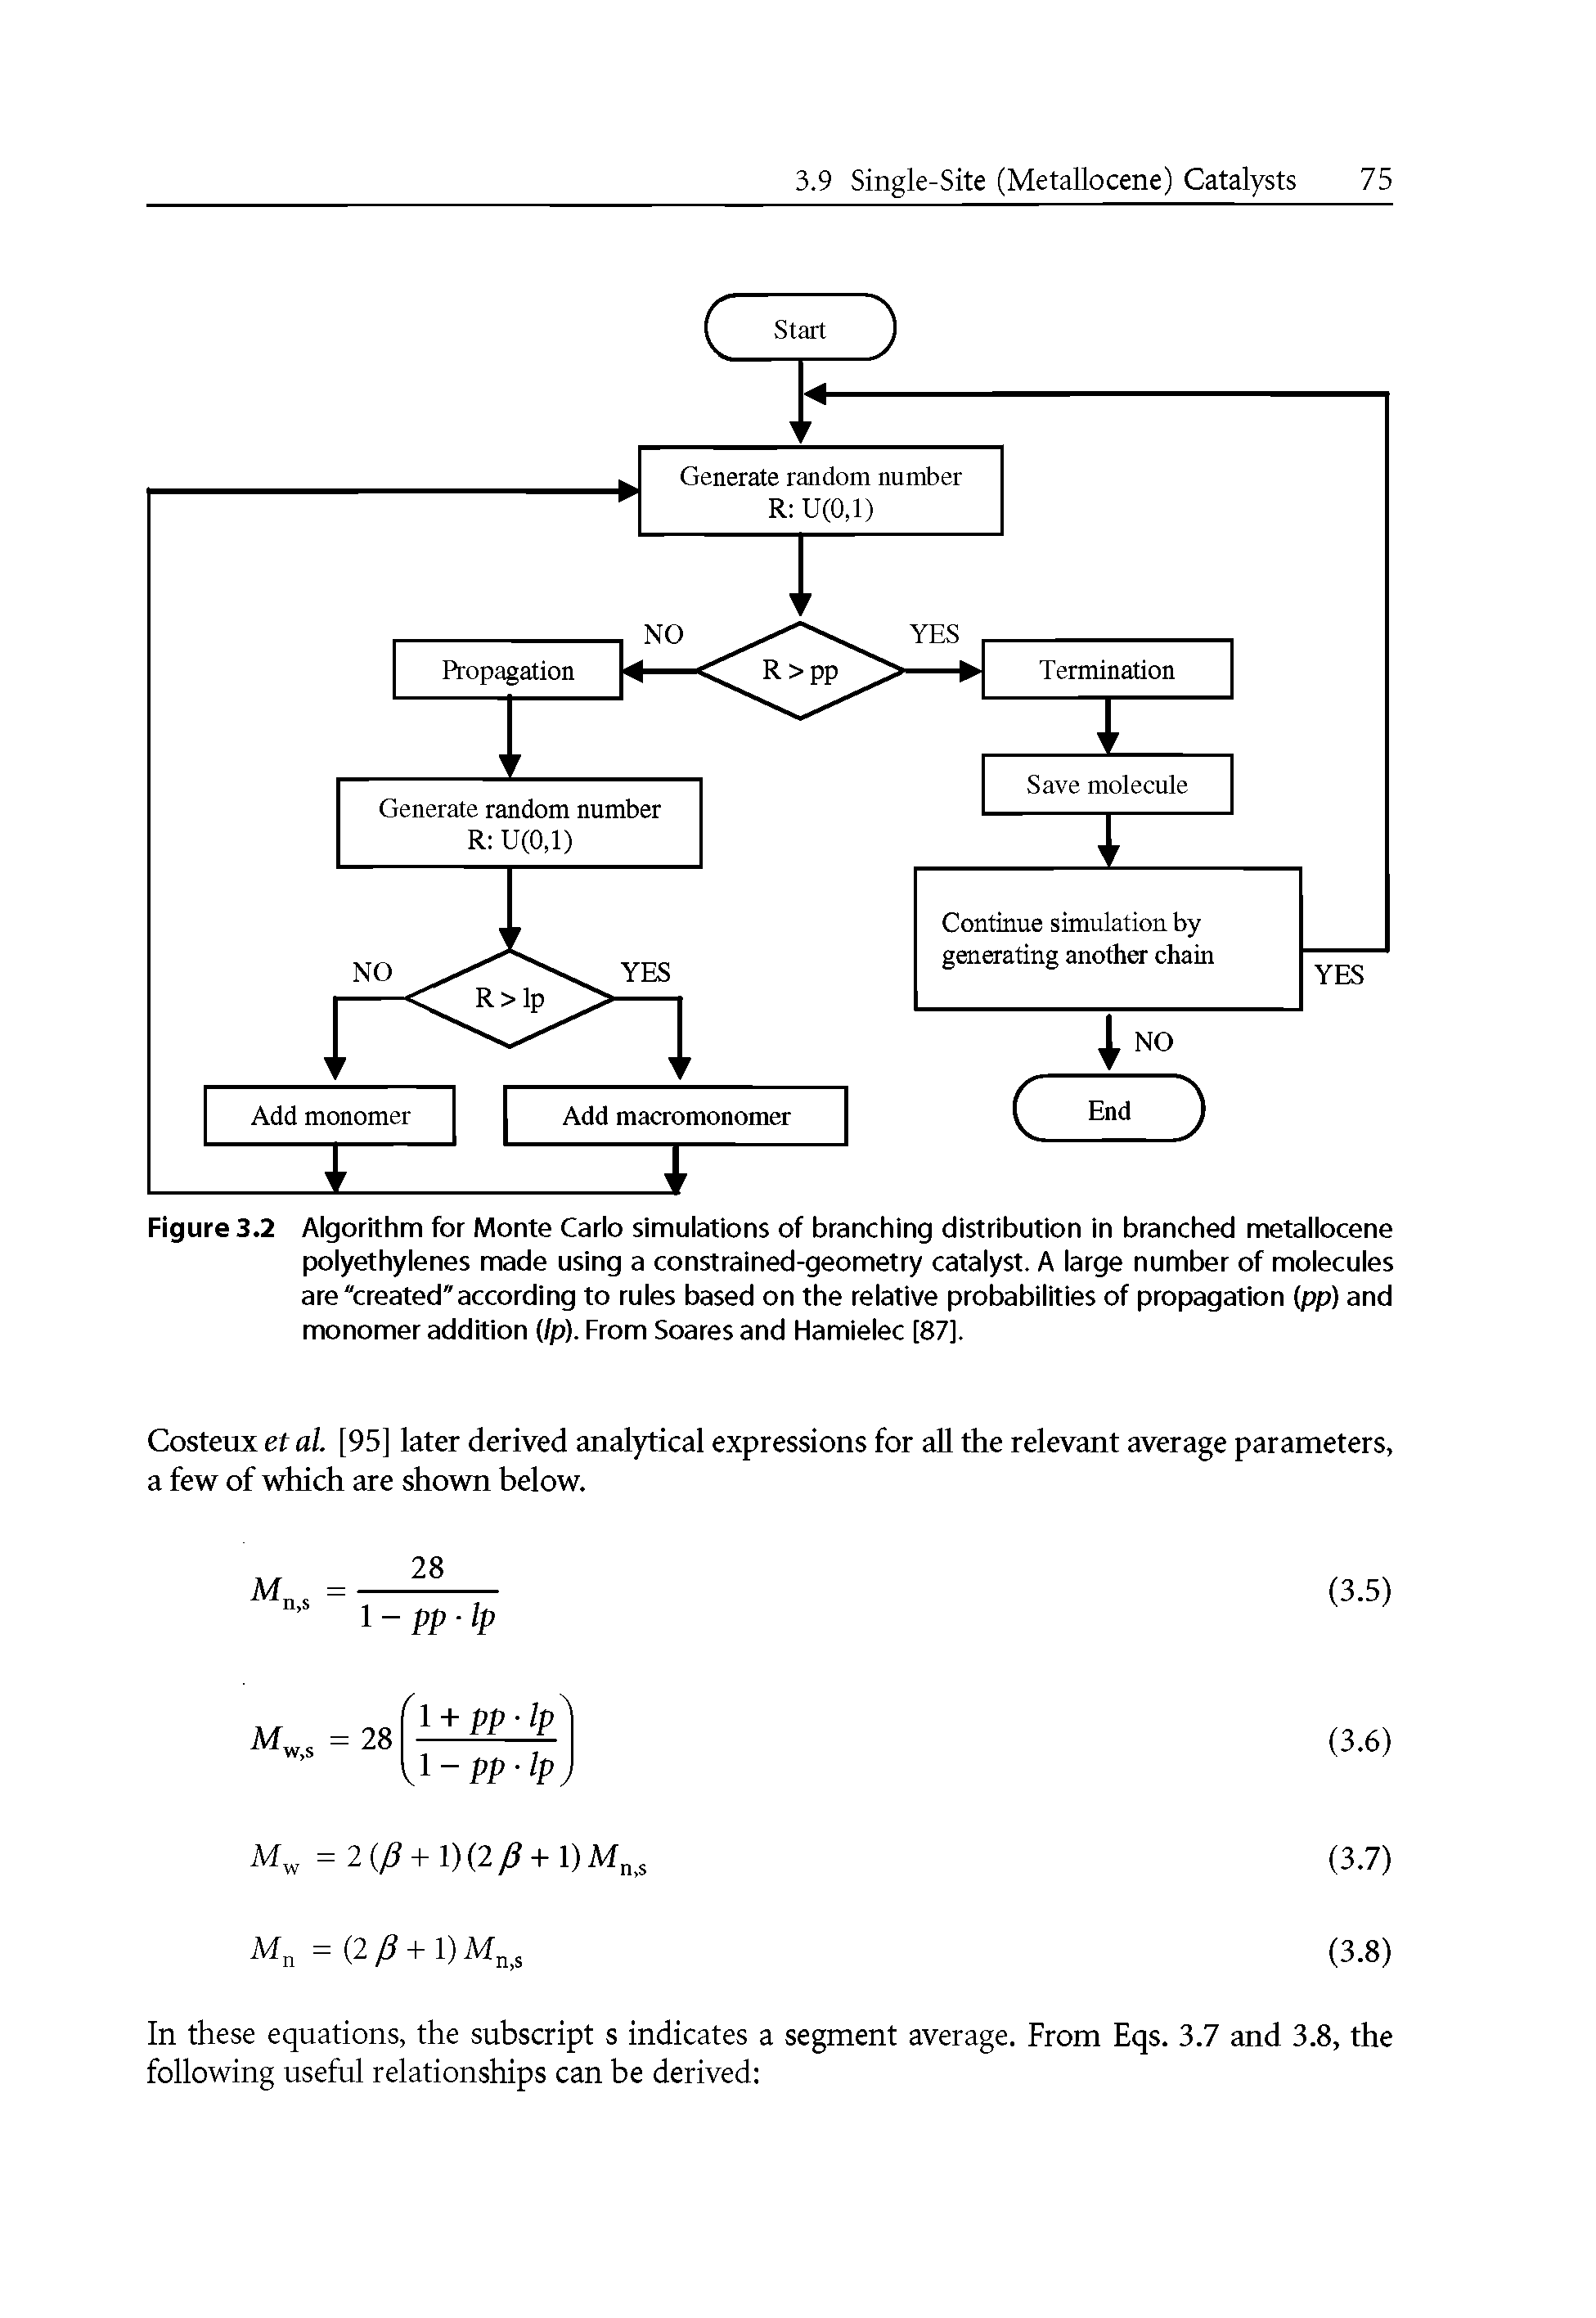 Figure 3.2 Algorithm for Monte Carlo simulations of branching distribution in branched metallocene polyethylenes made using a constrained-geometry catalyst. A large number of molecules are "created"according to rules based on the relative probabilities of propagation (pp) and monomer addition Ip). From Soares and Hamielec [871.